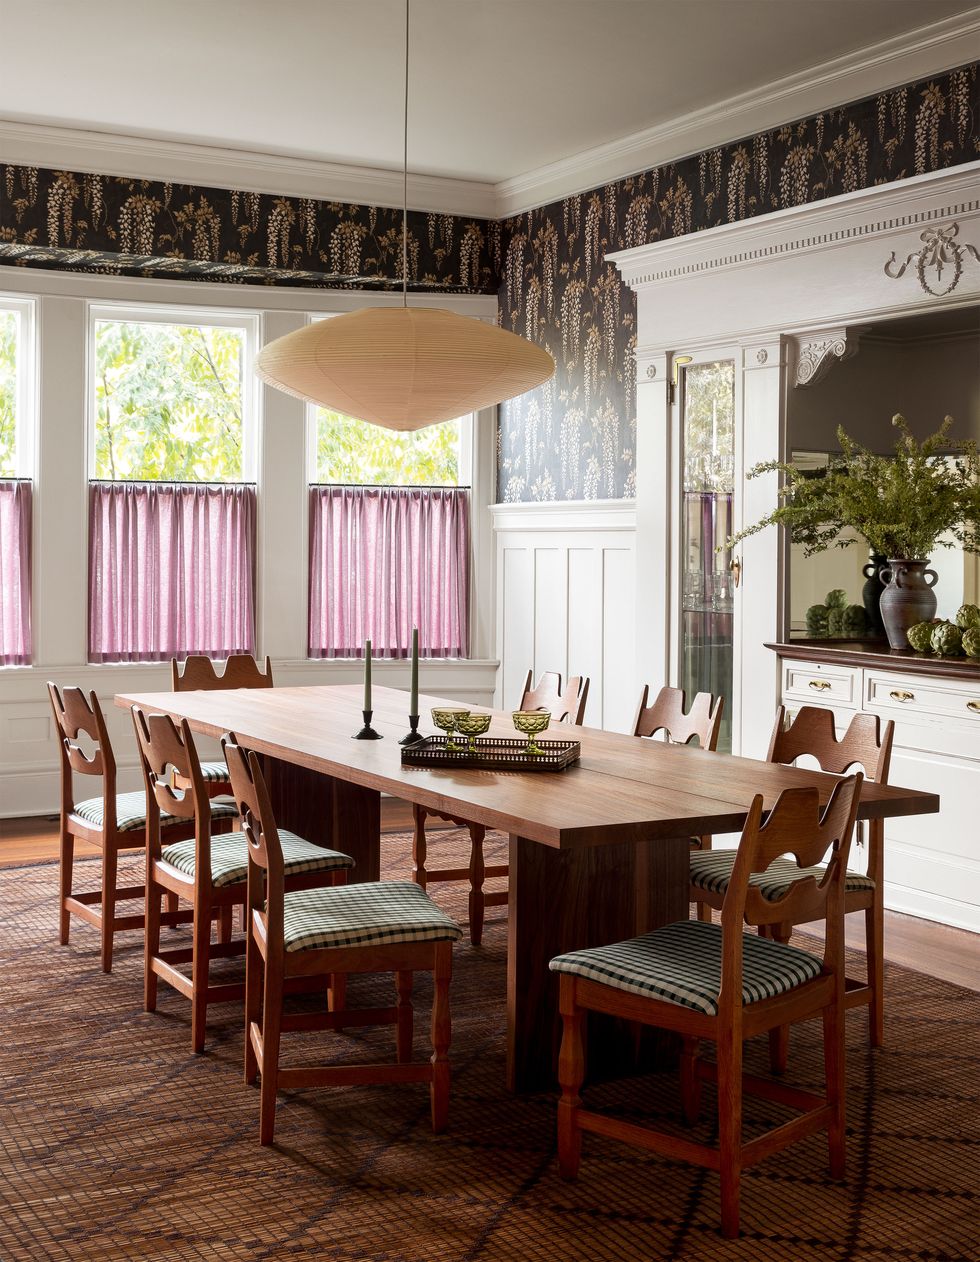 dining room with wood table and eight chairs, paper pendant, walls with white wainscoting and fern print wallpaper above, built in sideboard with mirrored door, windows with half curtains, moroccan rug